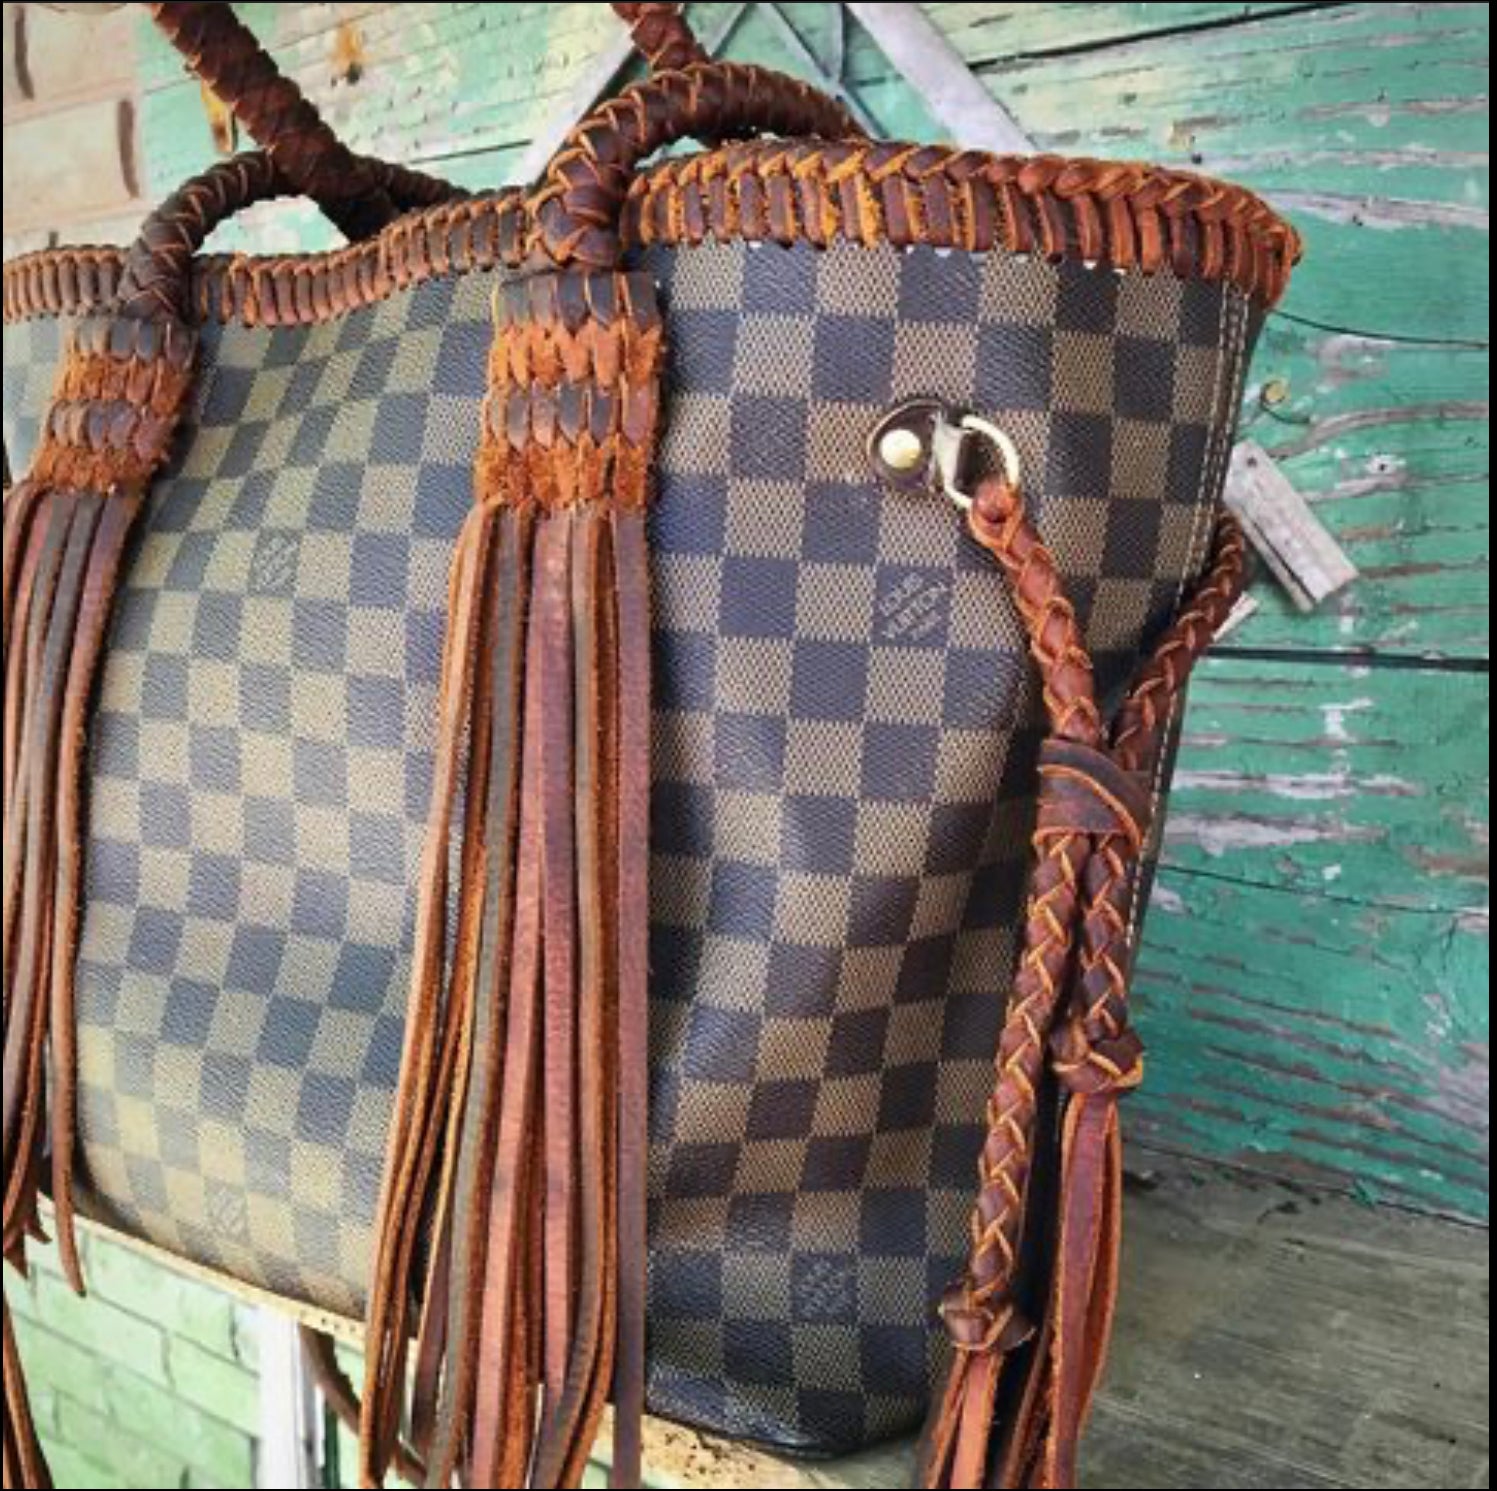 Neverfull GM REVAMP/LEATHERWORK “The Works” – The Neon Gypsy Shopping